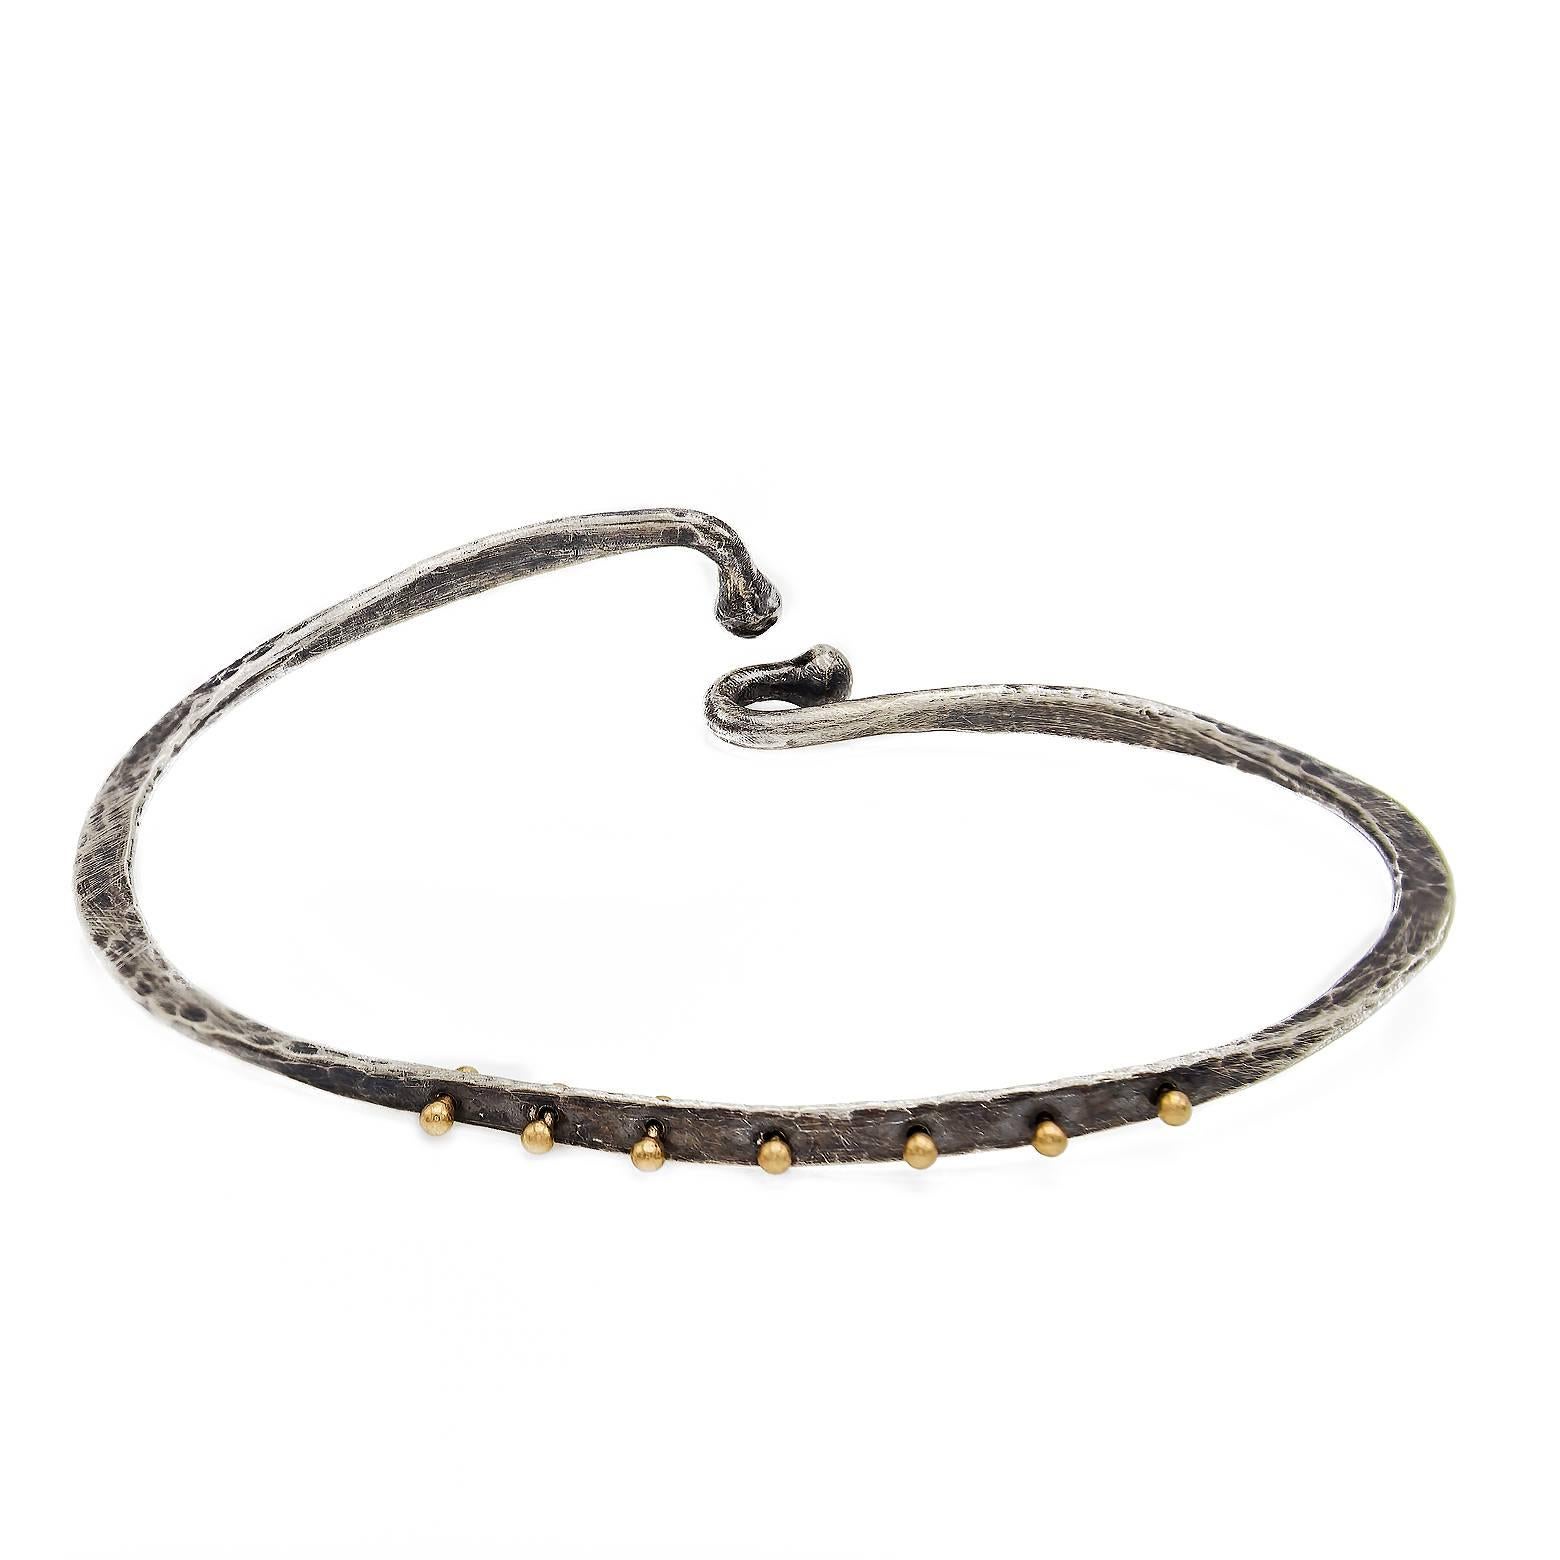 This hammered bangle is urban and 'Hip'.The 14k gold 'rivets' enhances  the oxidized finish. The 'lock' closure is secure and artfully done. A classic yet unique piece of jewelry. 